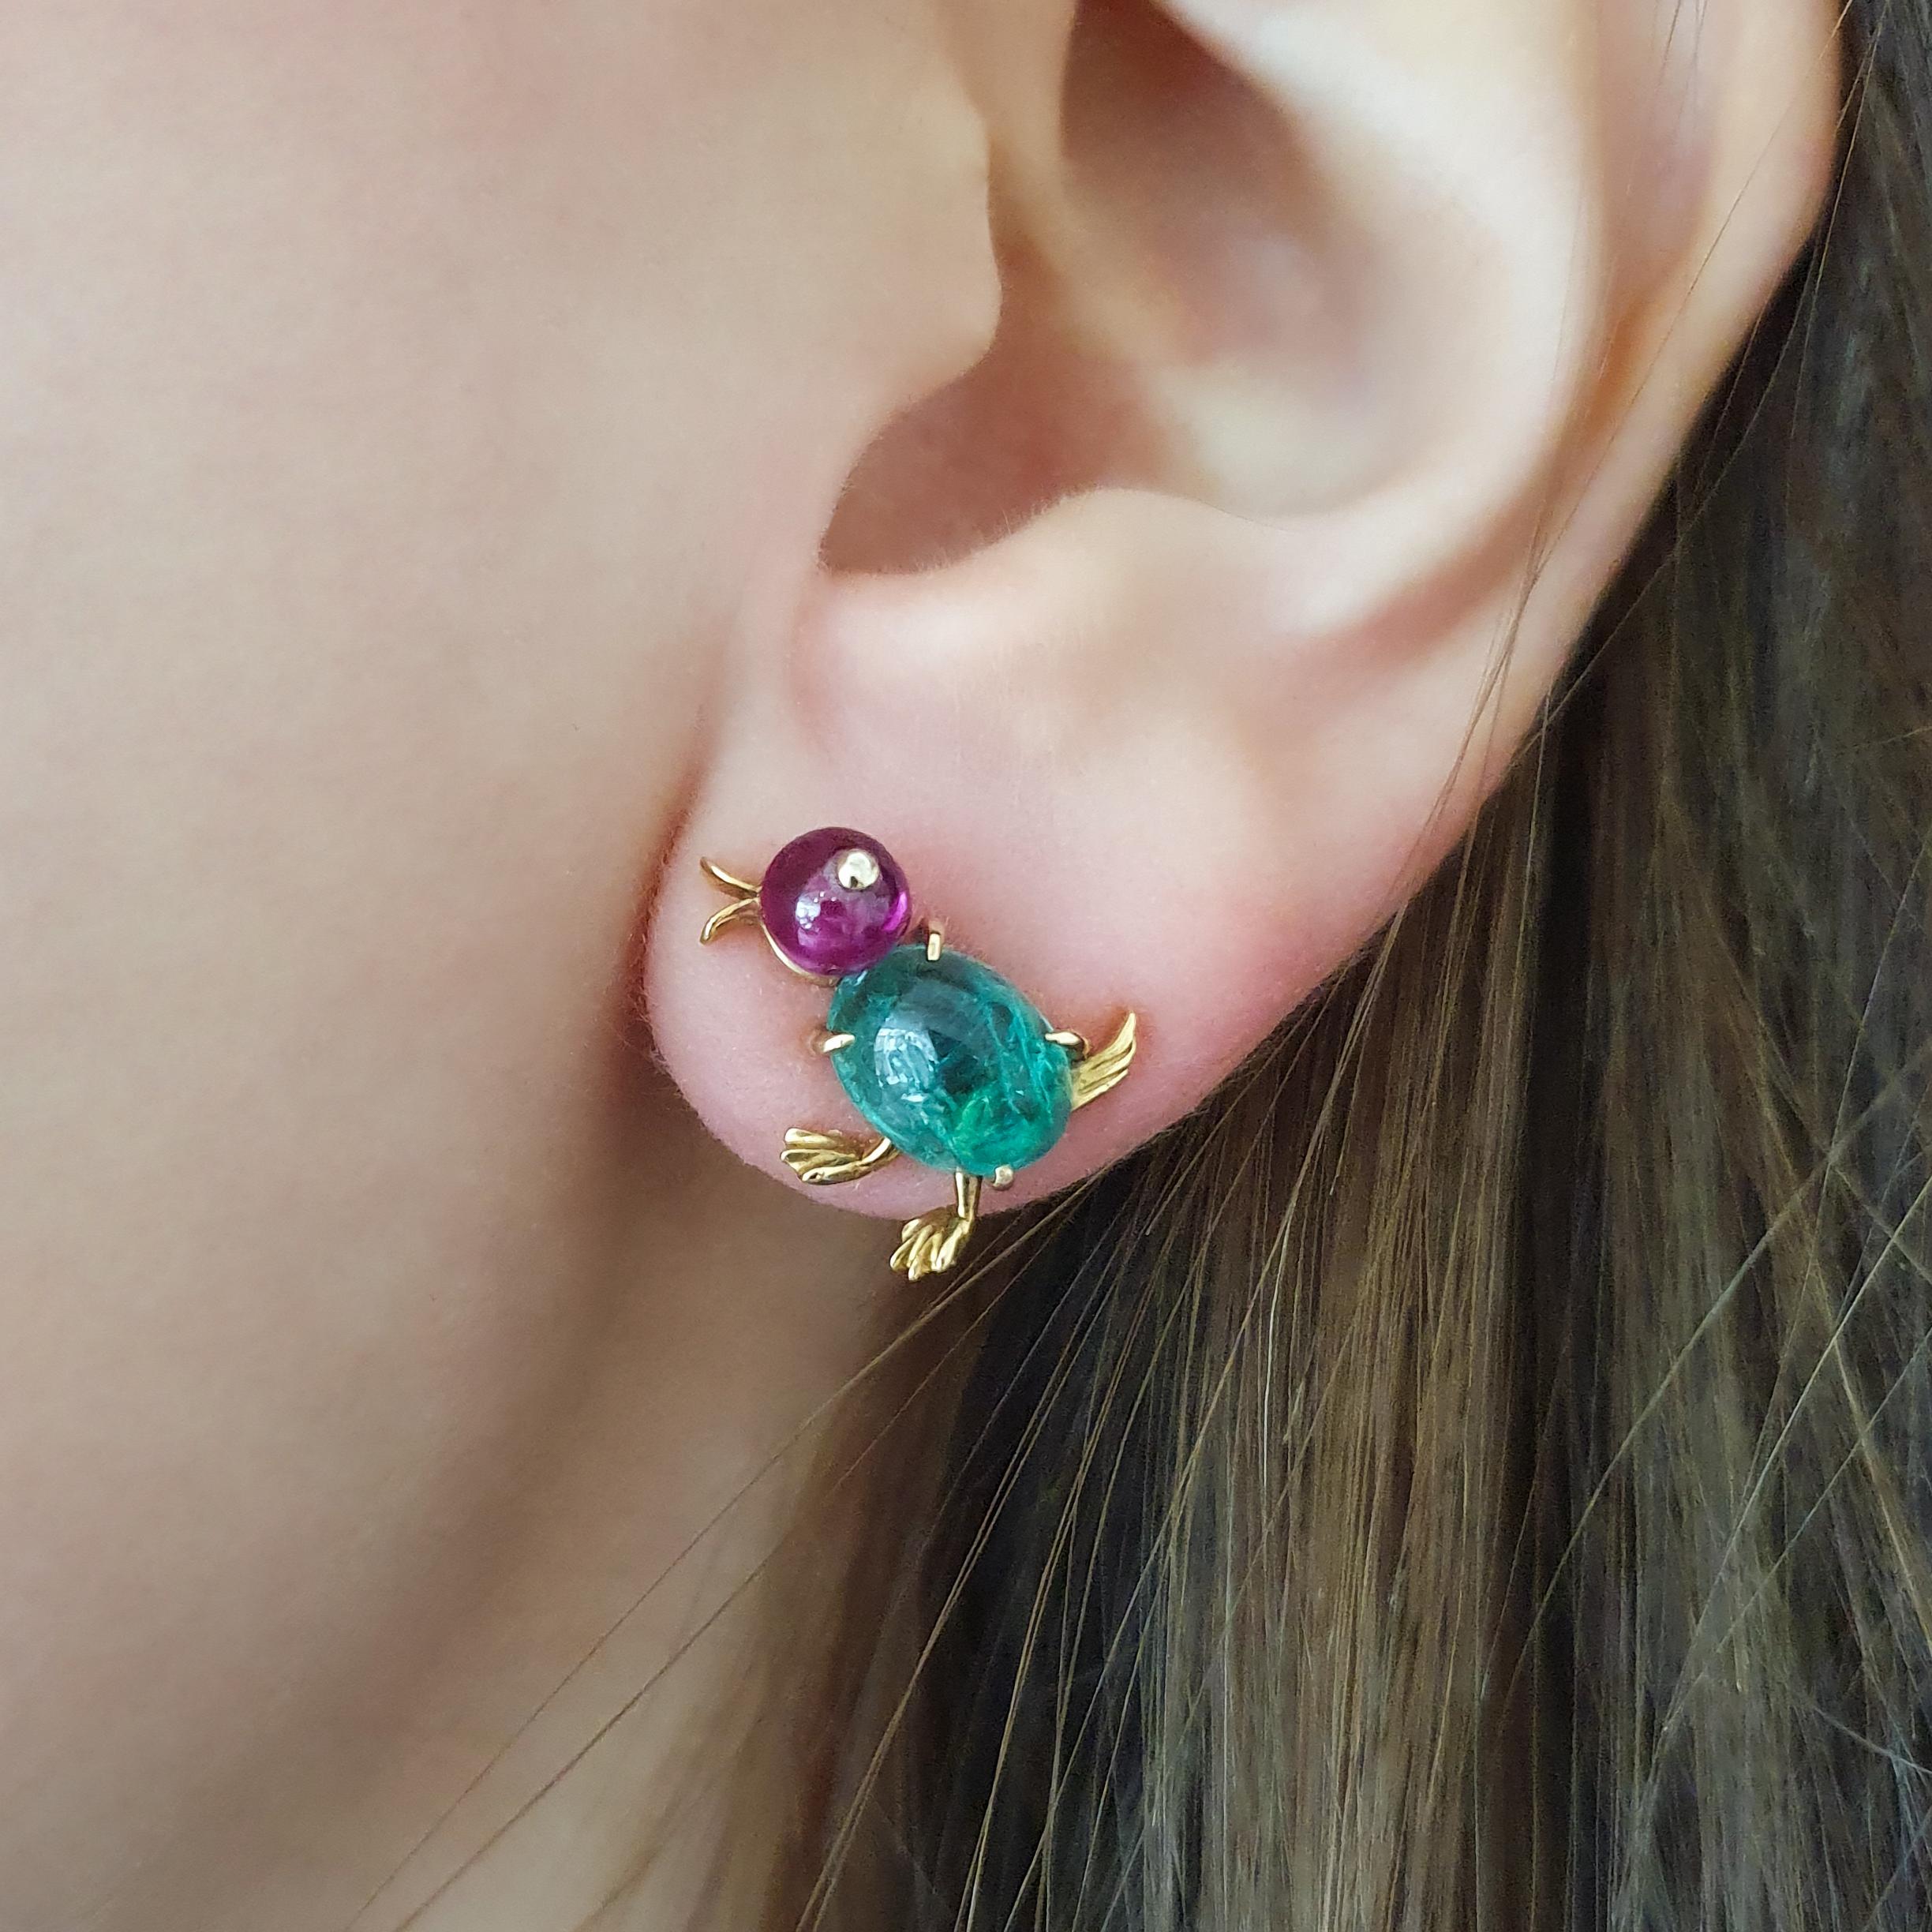 Lovely pair of baby Ducks Pins, could be worn as Clips Ear studs on yellow gold. Emerald cabochon, Sapphire and Ruby beads and Diamond rose-cut.
Size: 0.59 x 0.59 inch (1.50 x 1.50 centimeters).
Total weight: 5.14 grams.

Former collection of a